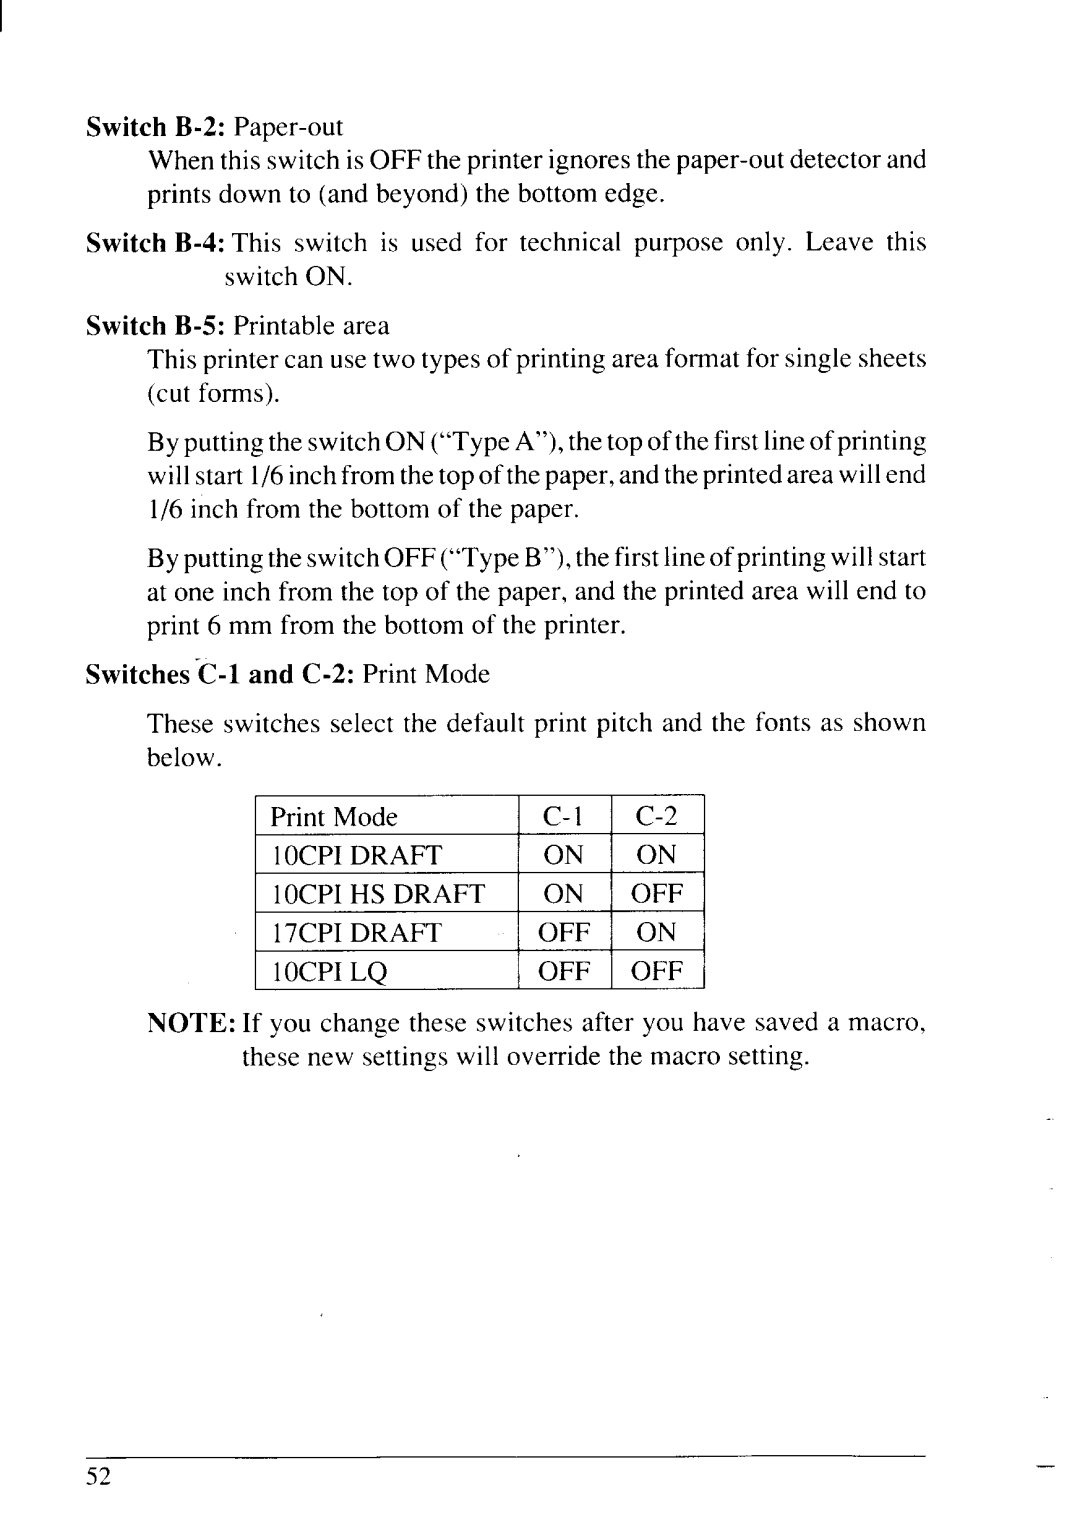 Star Micronics NX-2430 Switch B-2 Paper-out, Switch B-5 Printable area, Switches -C-l and C-2 Print Mode, 10CPI DRAFT 